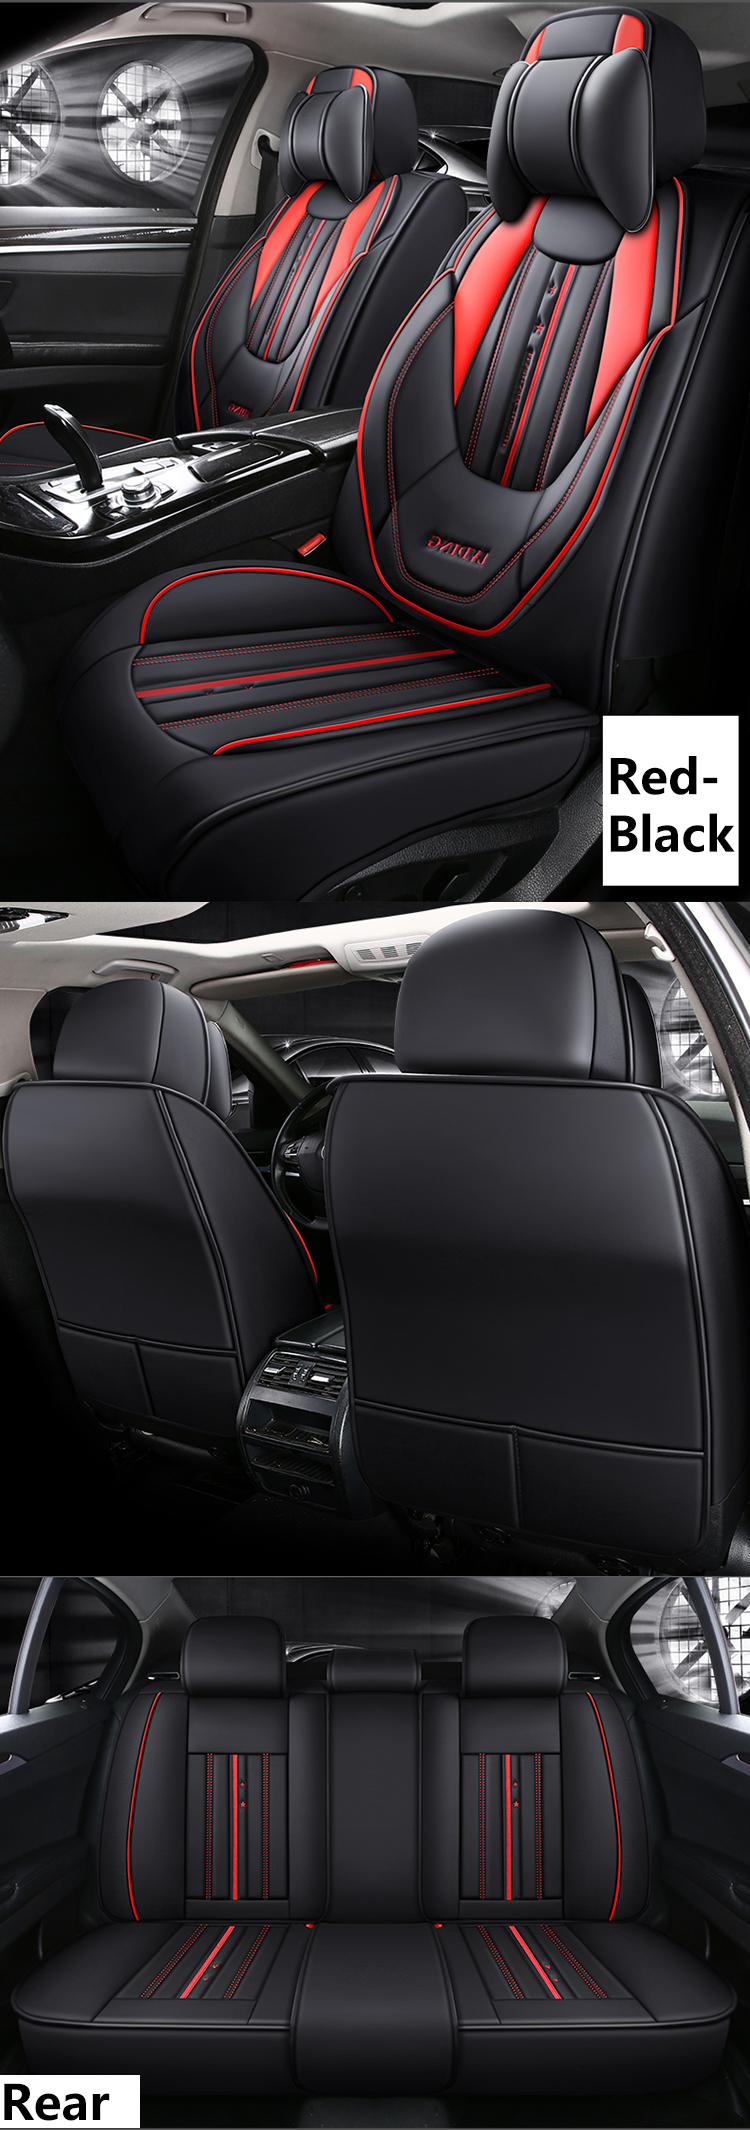 Universal Black and Red Car Seat Cover